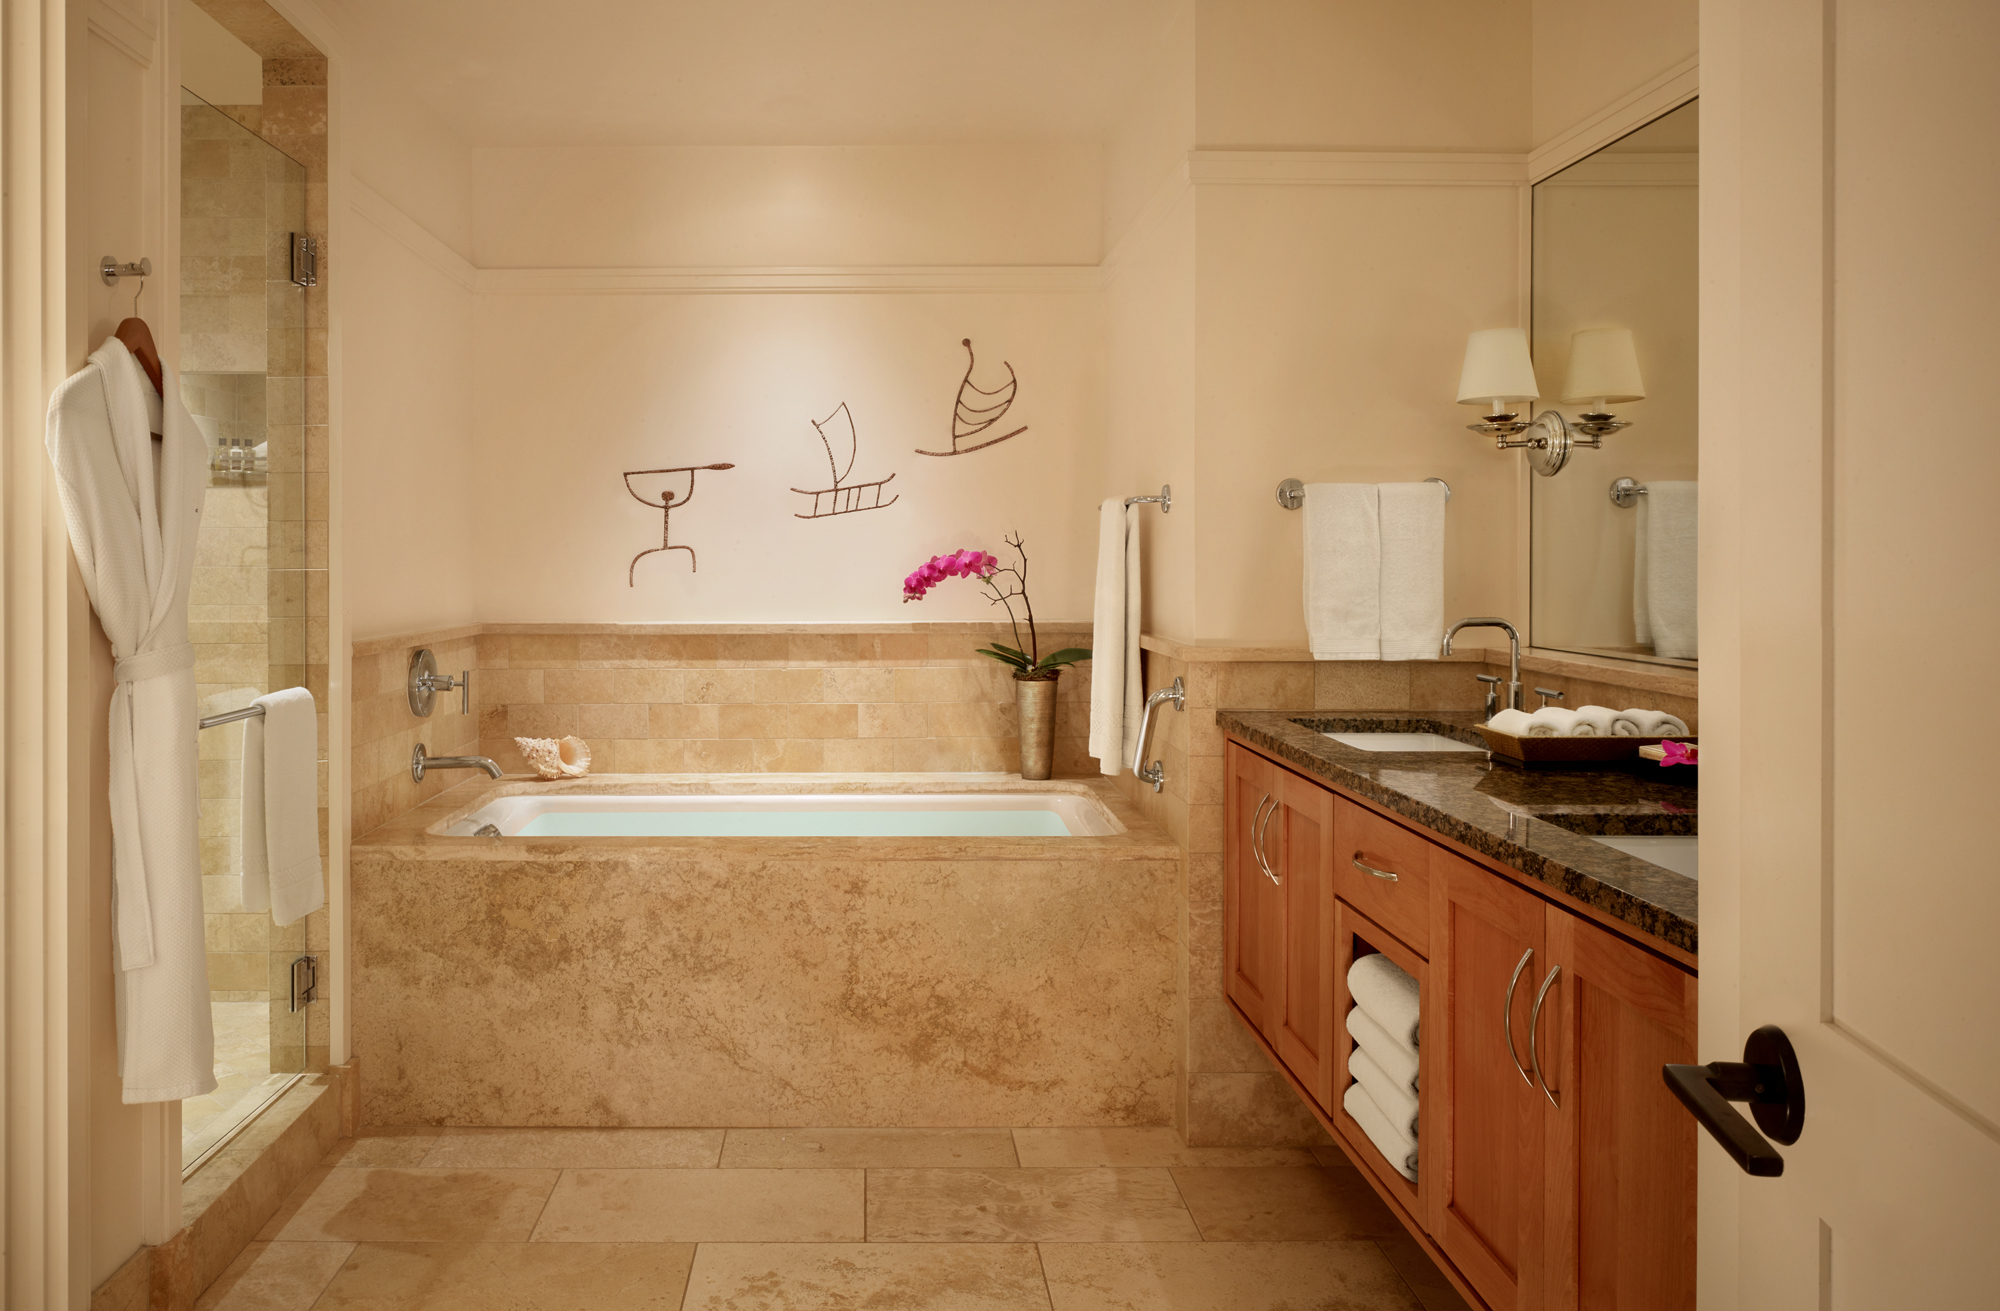 All residences at Montage Kapalua Bay includes two marble bathrooms with deep soaking bathtub, double vanity and separate shower